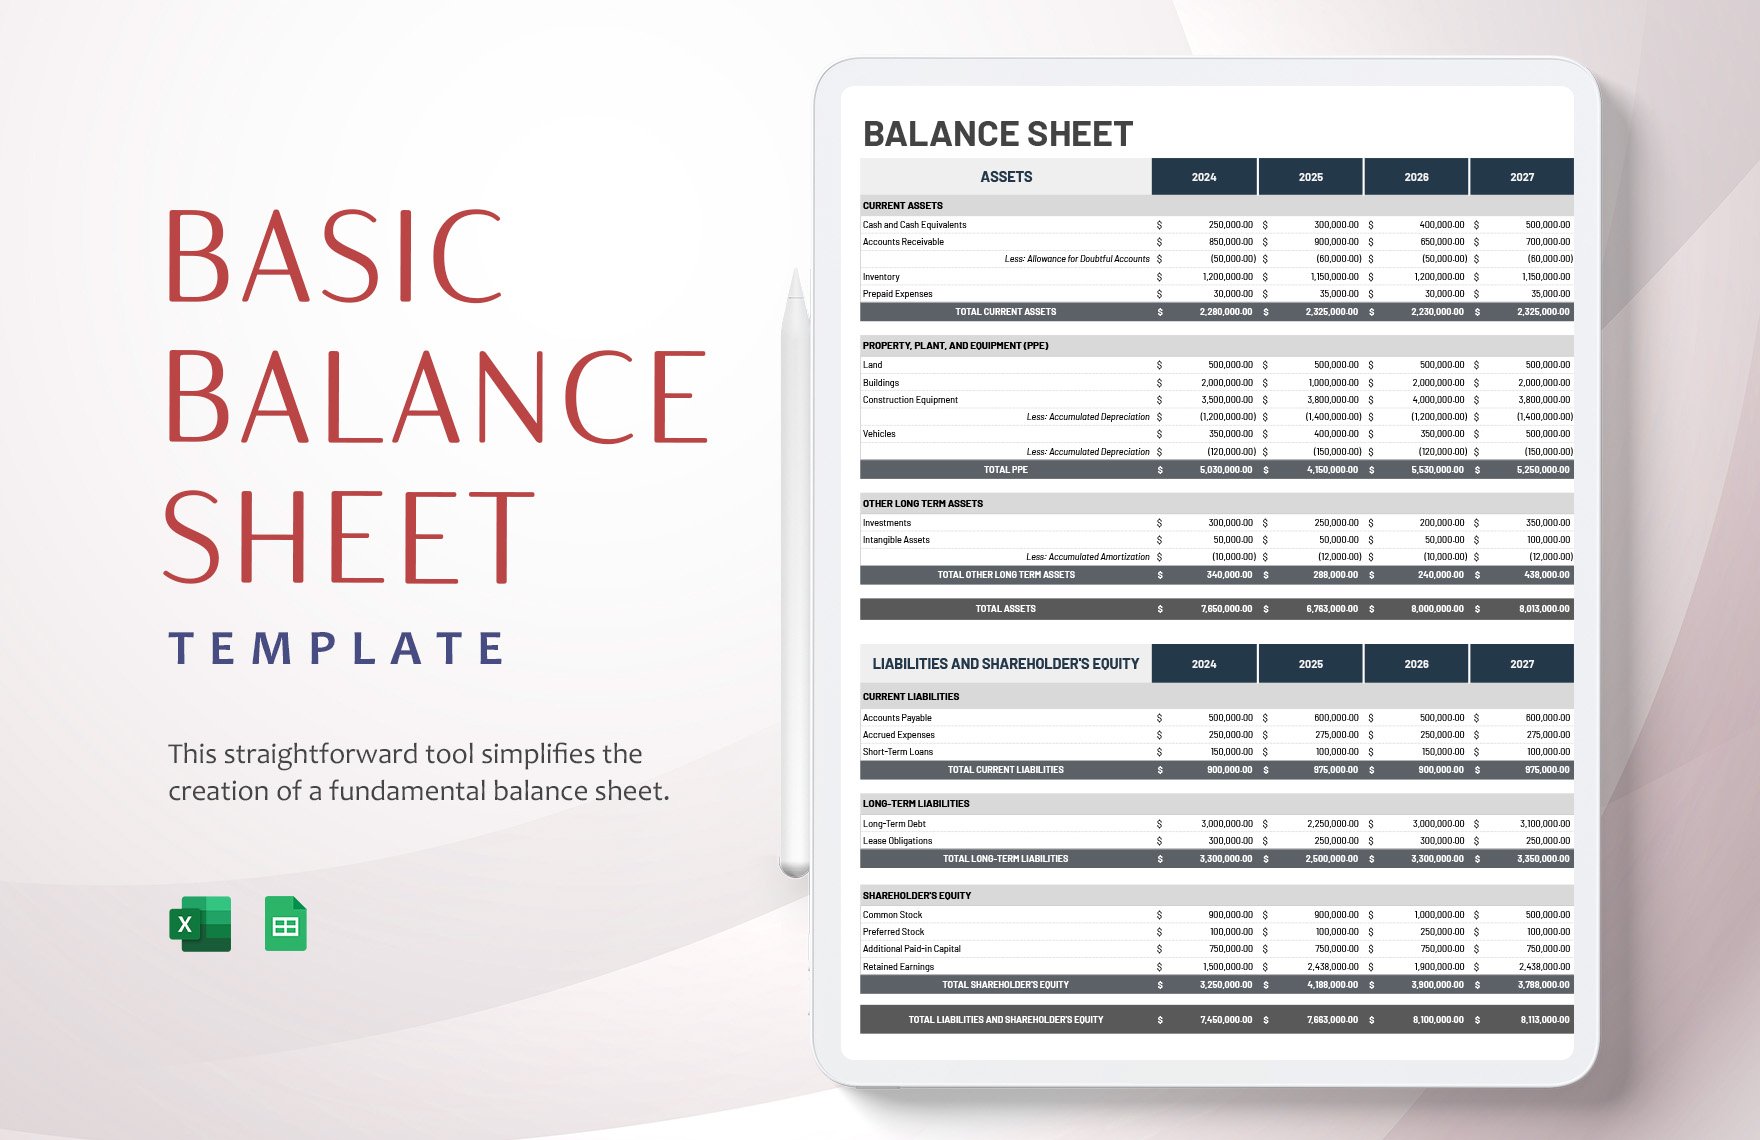 Basic Balance Sheet Template in Excel, Google Sheets